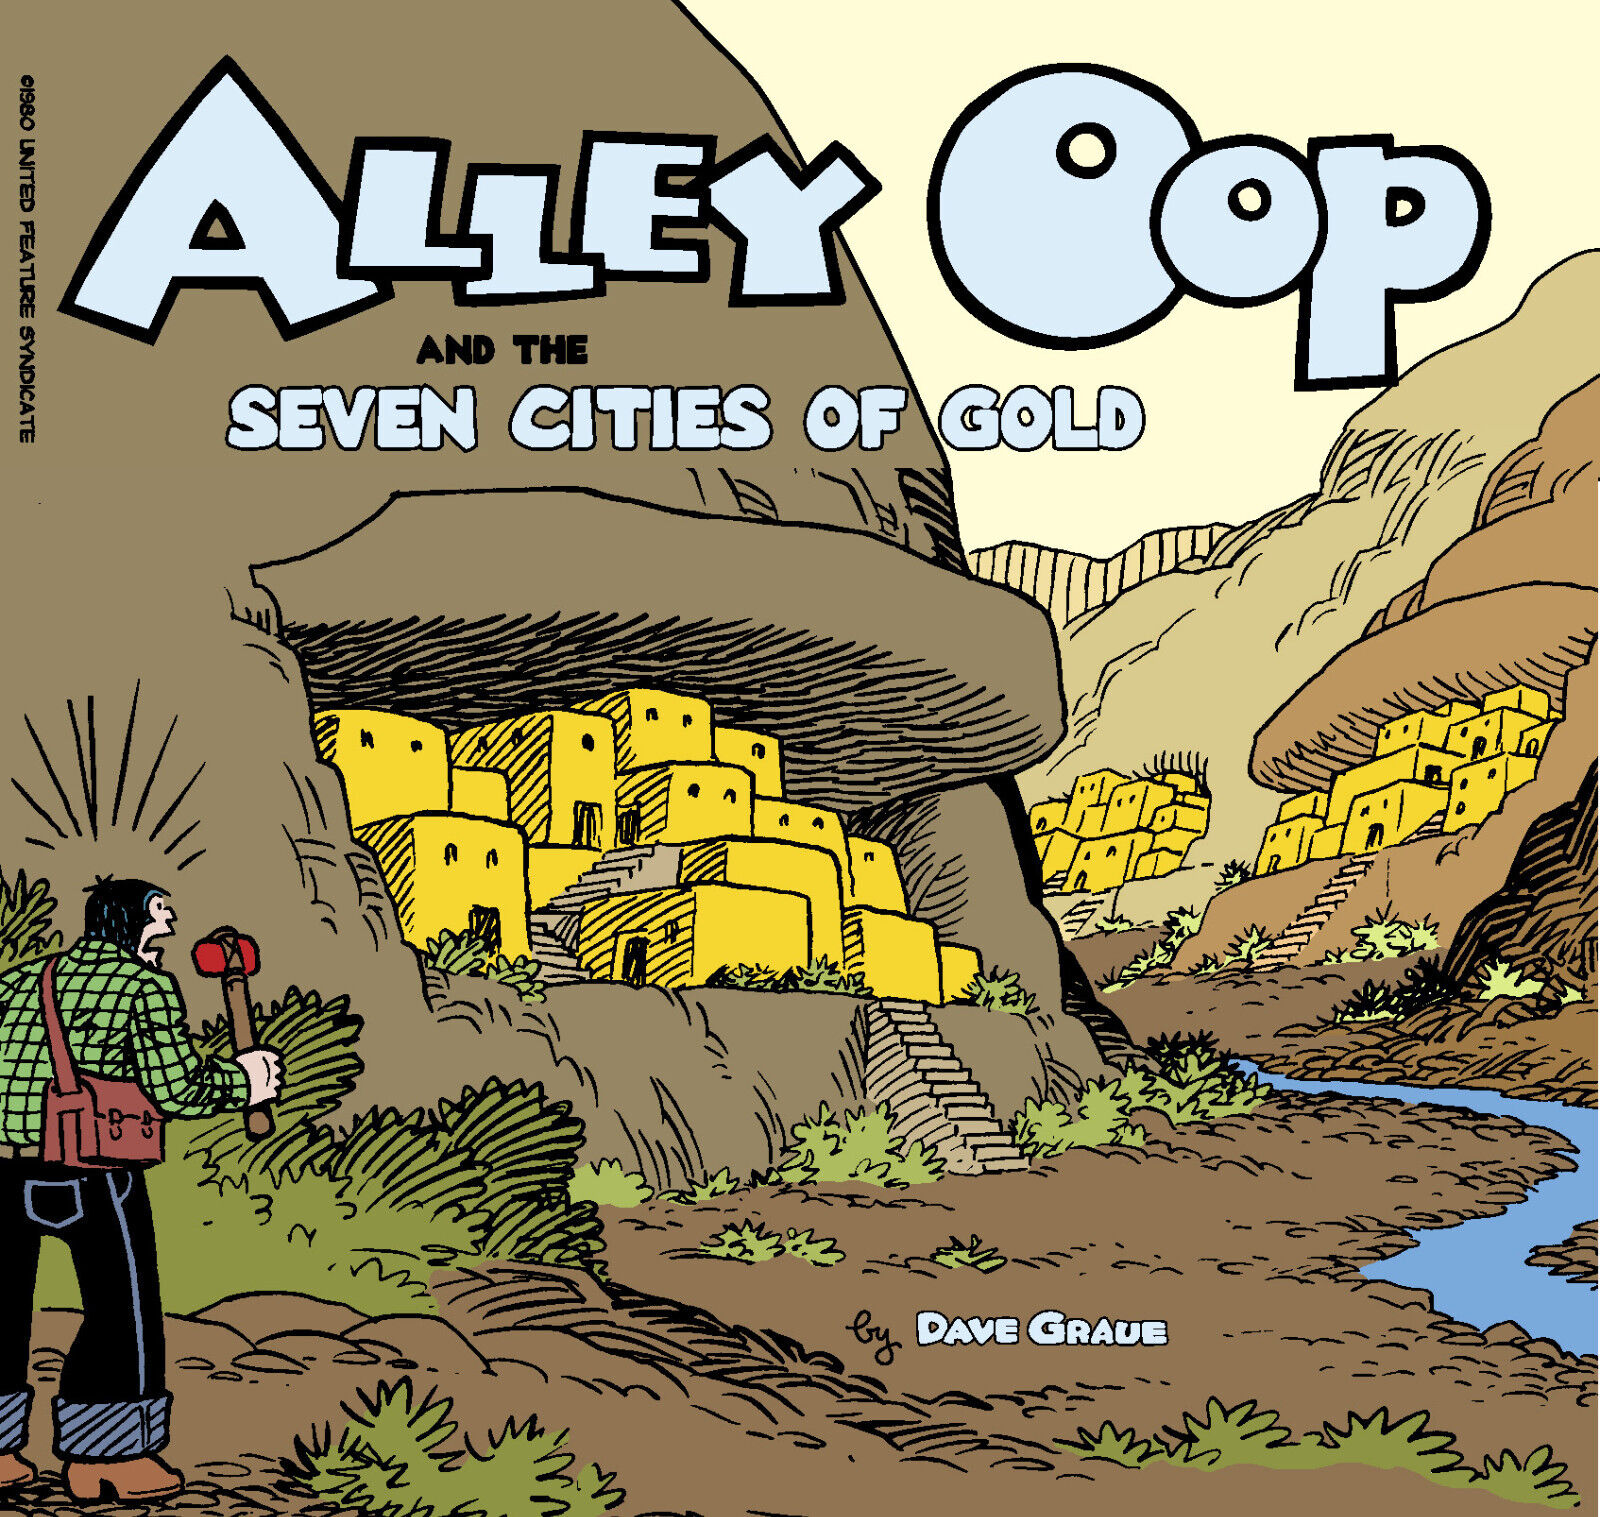 Alley Oop 1980 - the Seven Cities of Gold - by Dave Graue - NEW